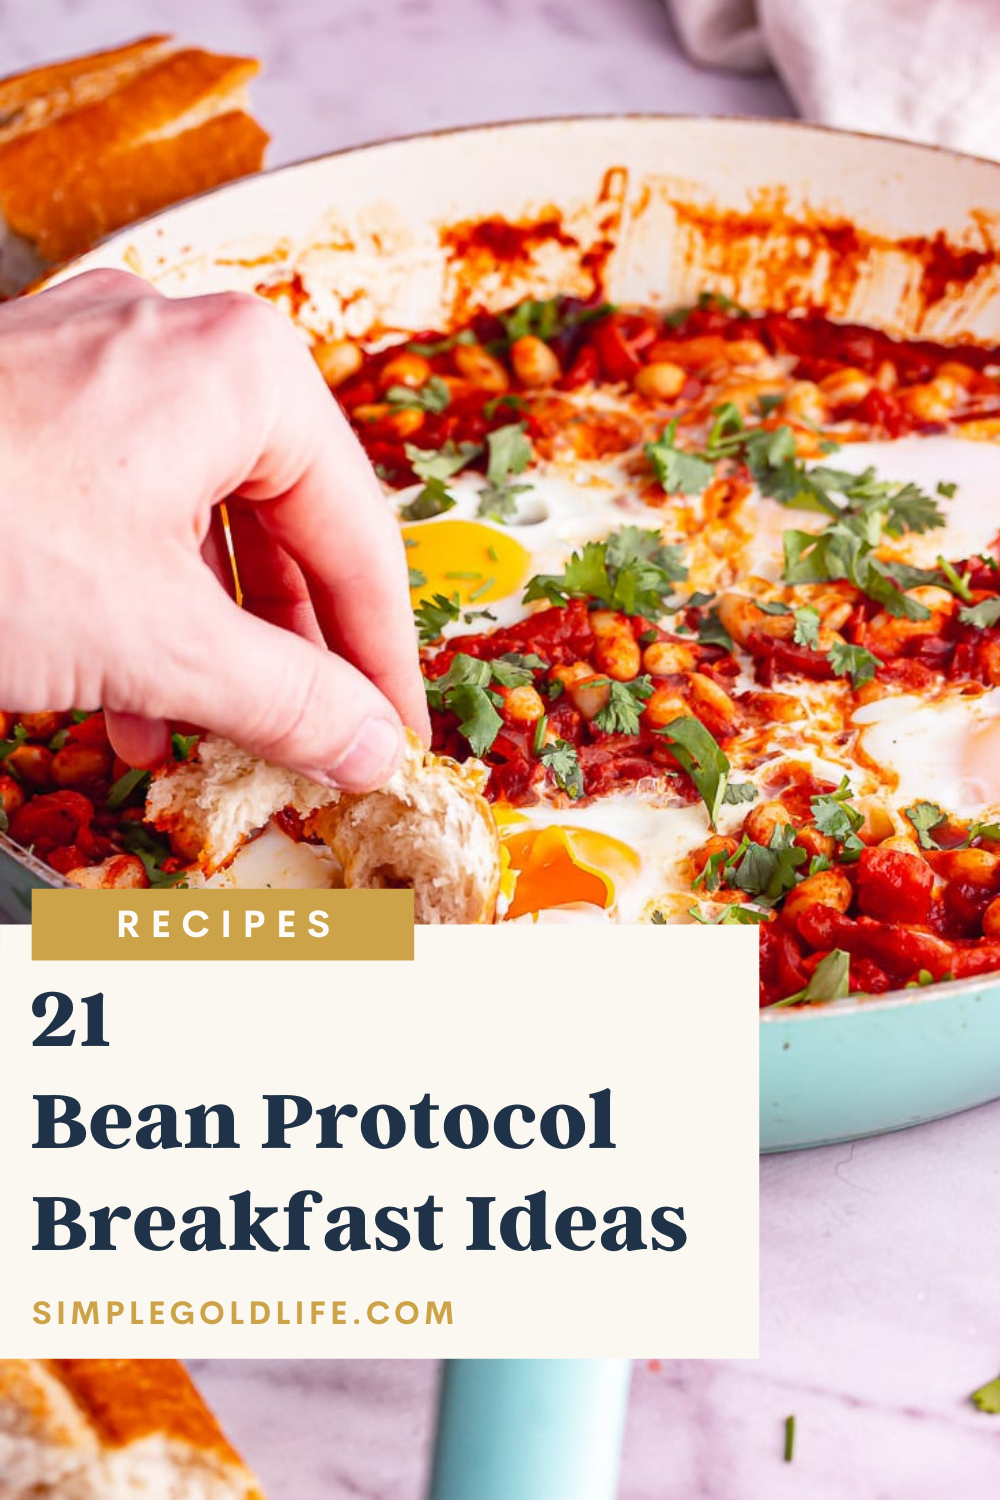  Who said you can’t have beans for breakfast? Try these amazing beany recipes today! 